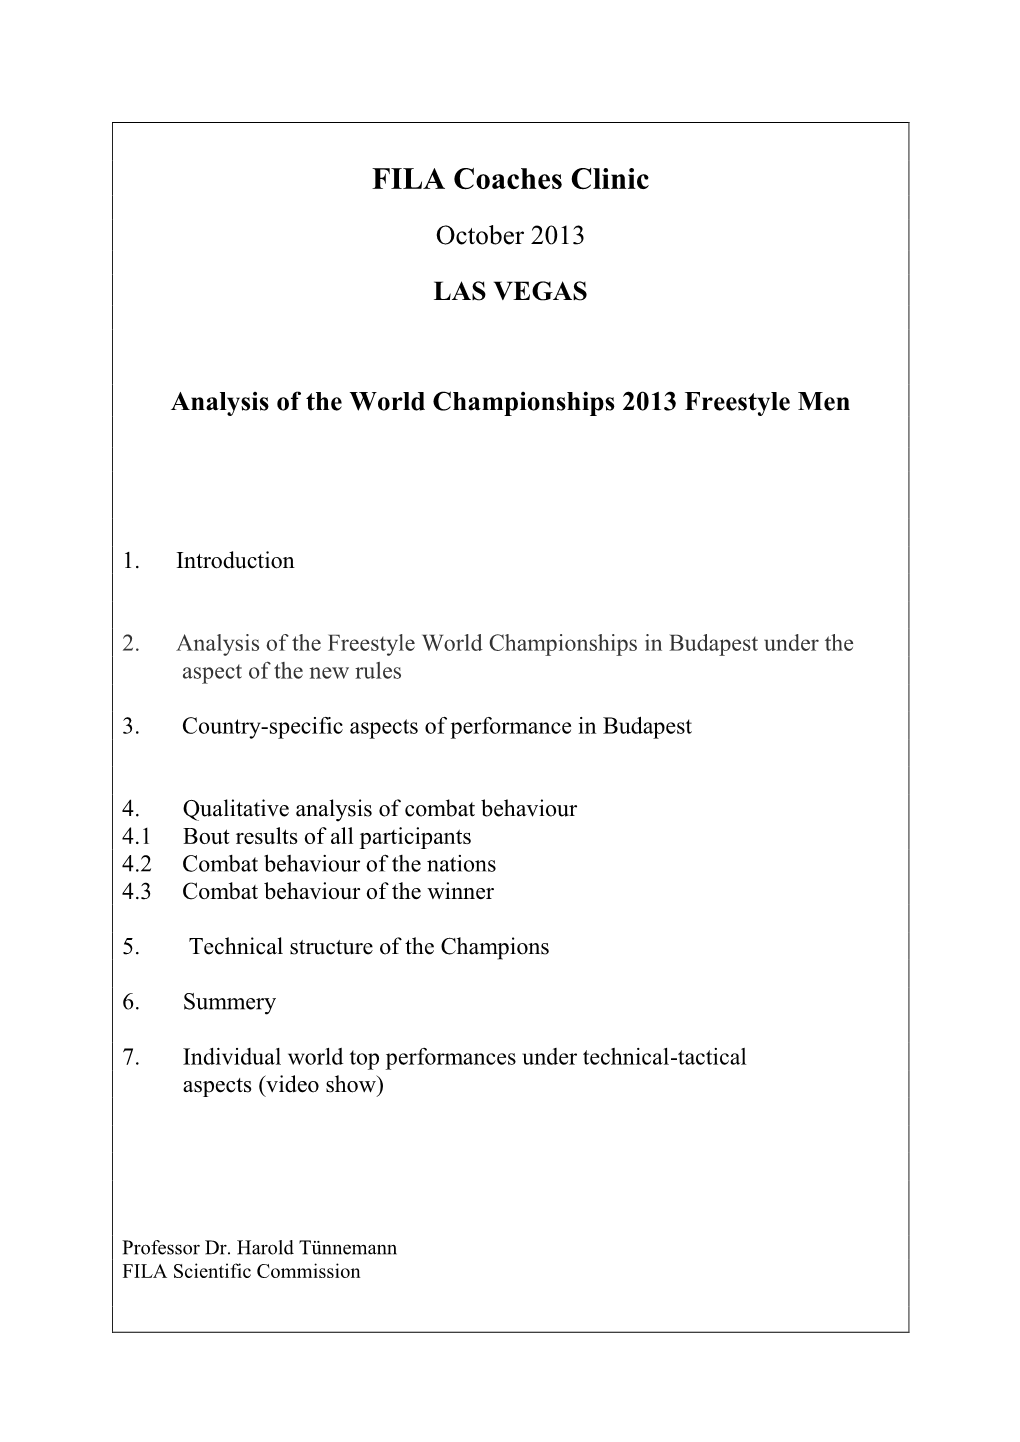 Analysis of the World Championships 2013 Freestyle Men